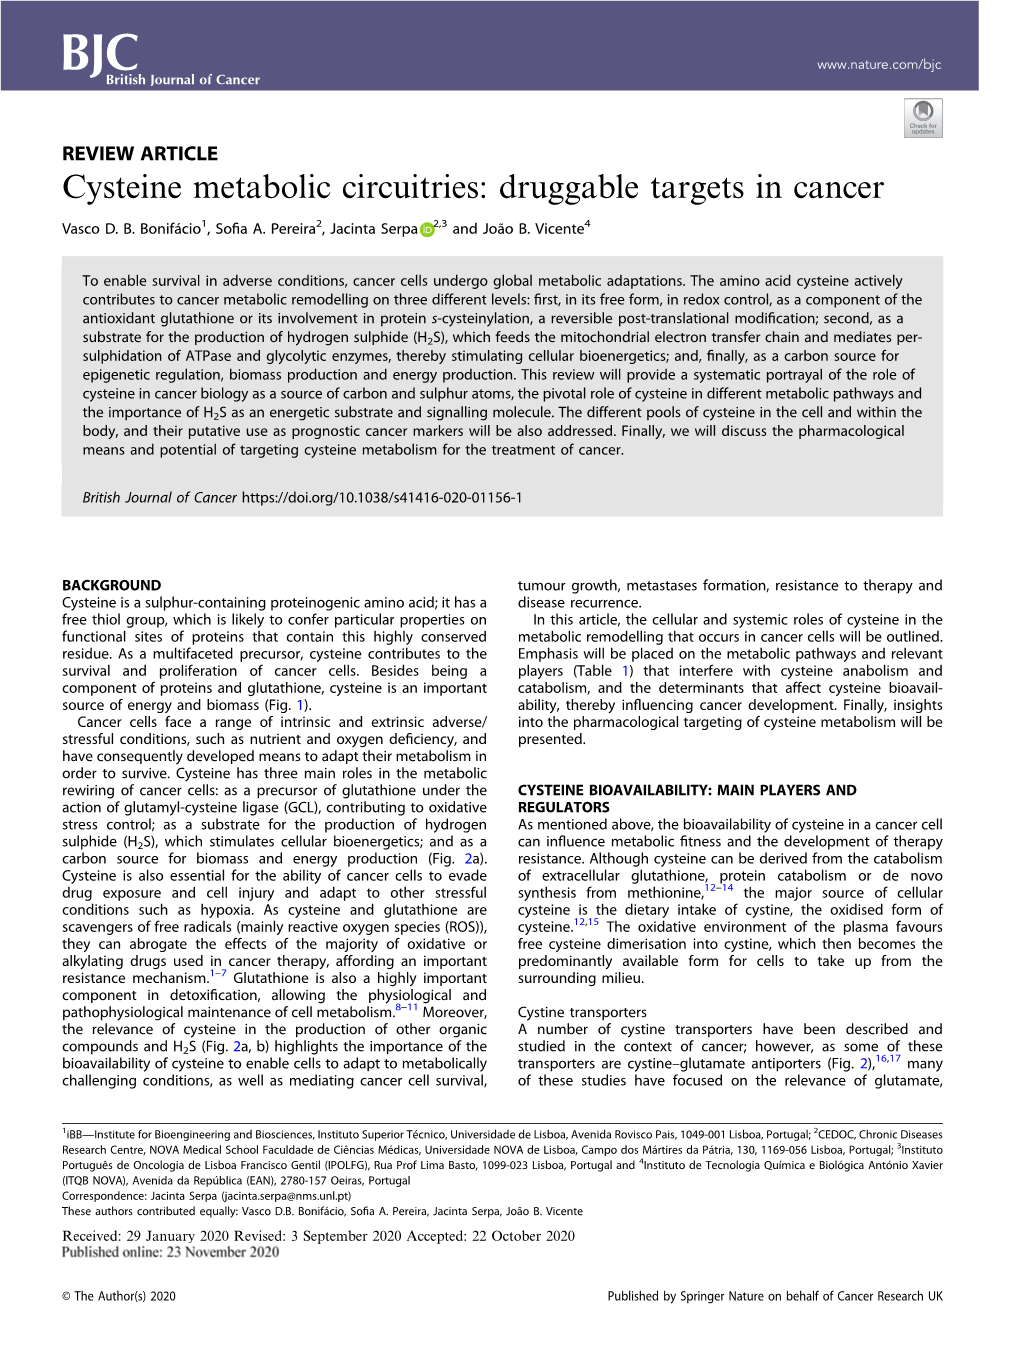 Cysteine Metabolic Circuitries: Druggable Targets in Cancer